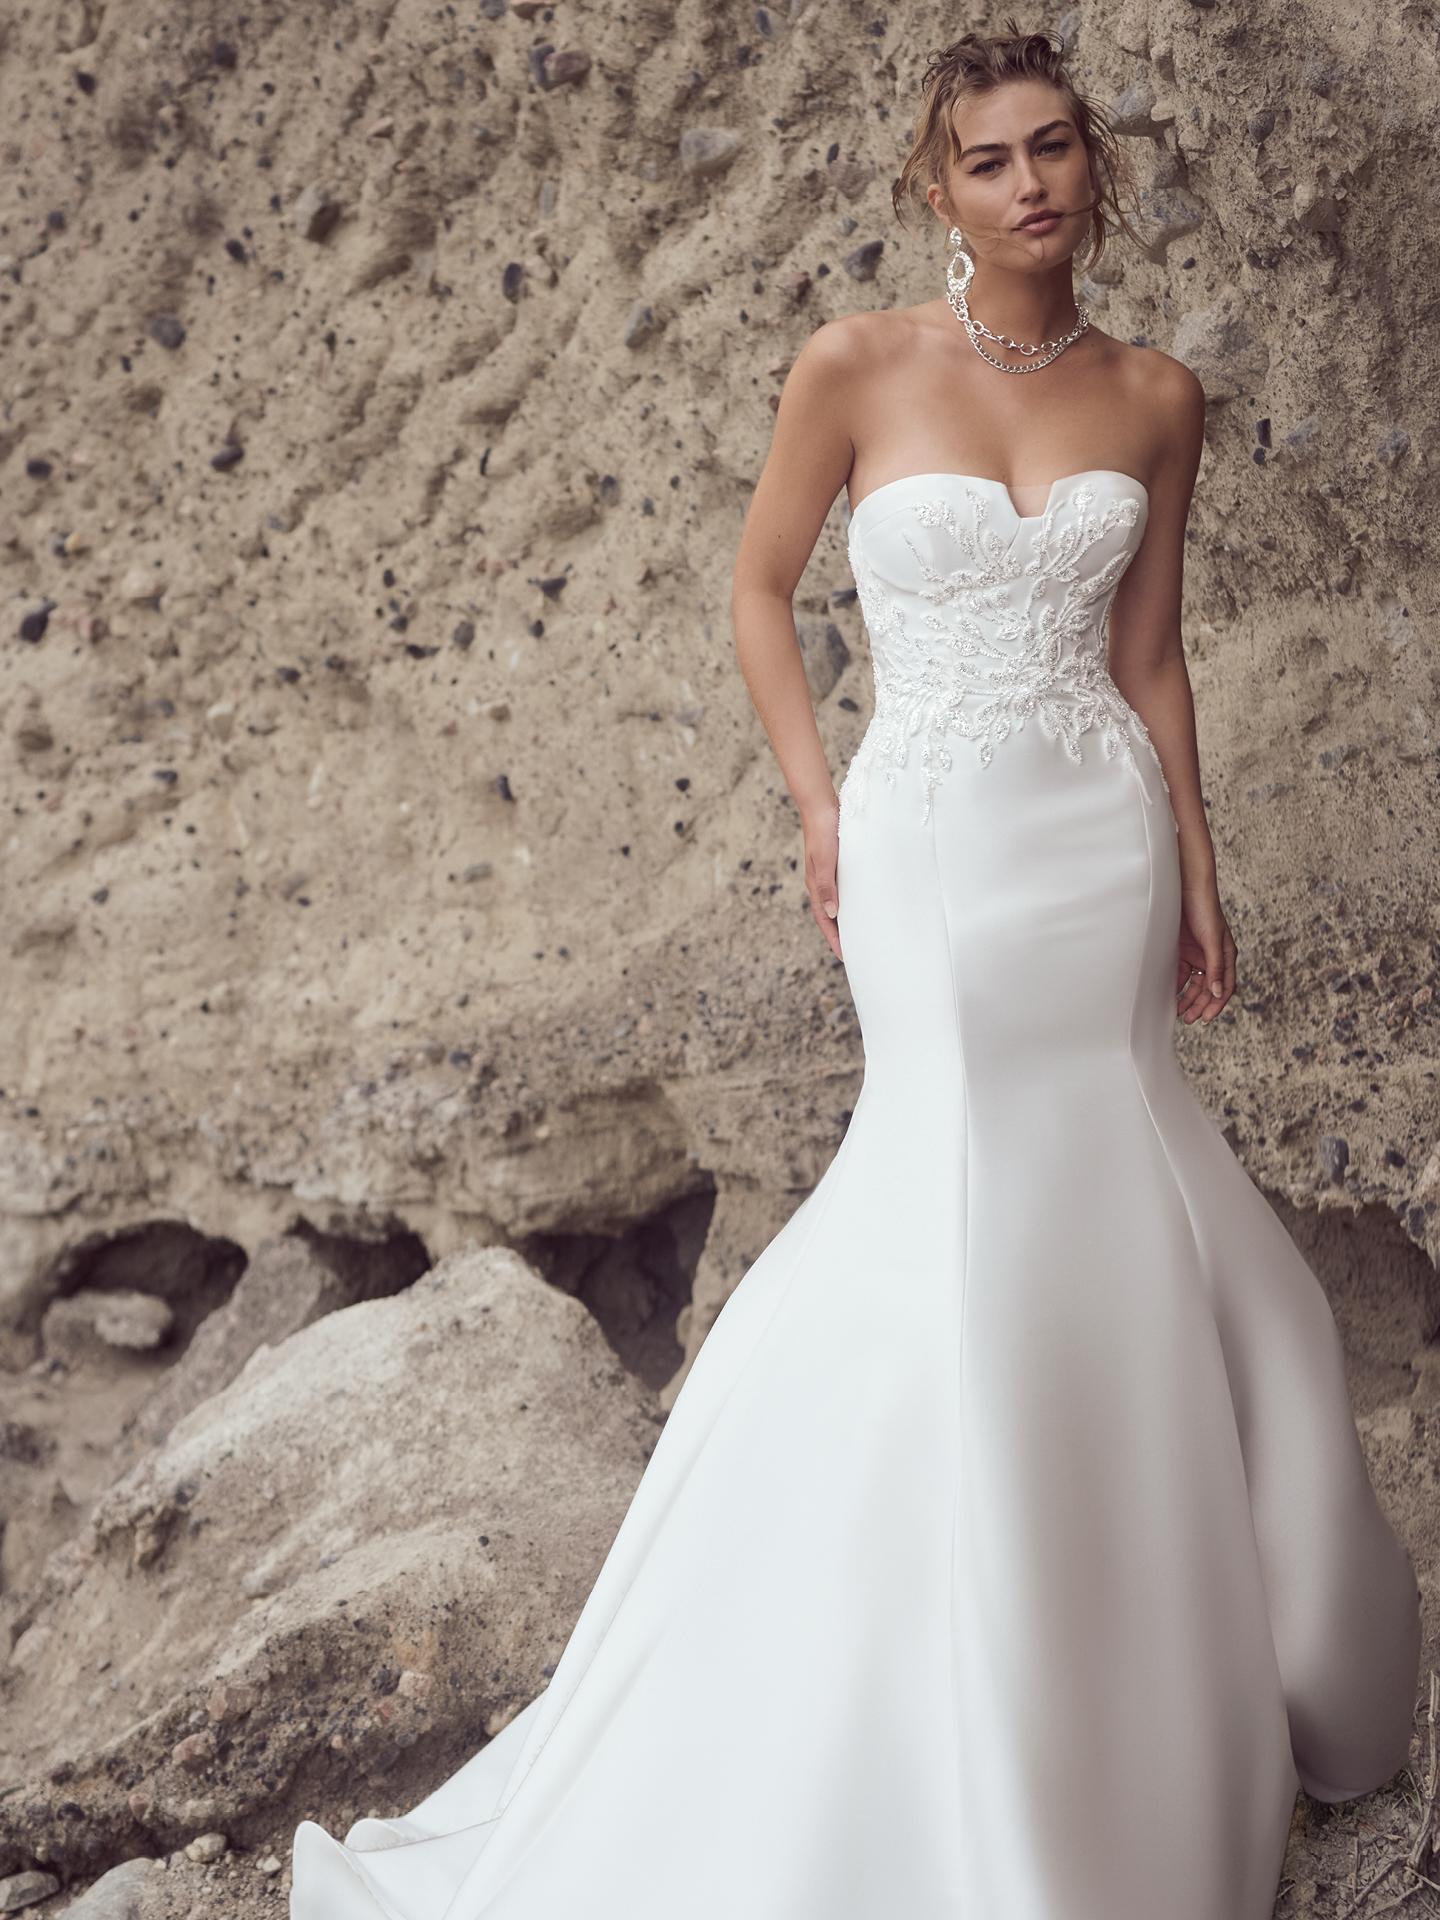 Bride In Square Neck Wedding Dress Called Italiana Lane By Sottero And Midgley